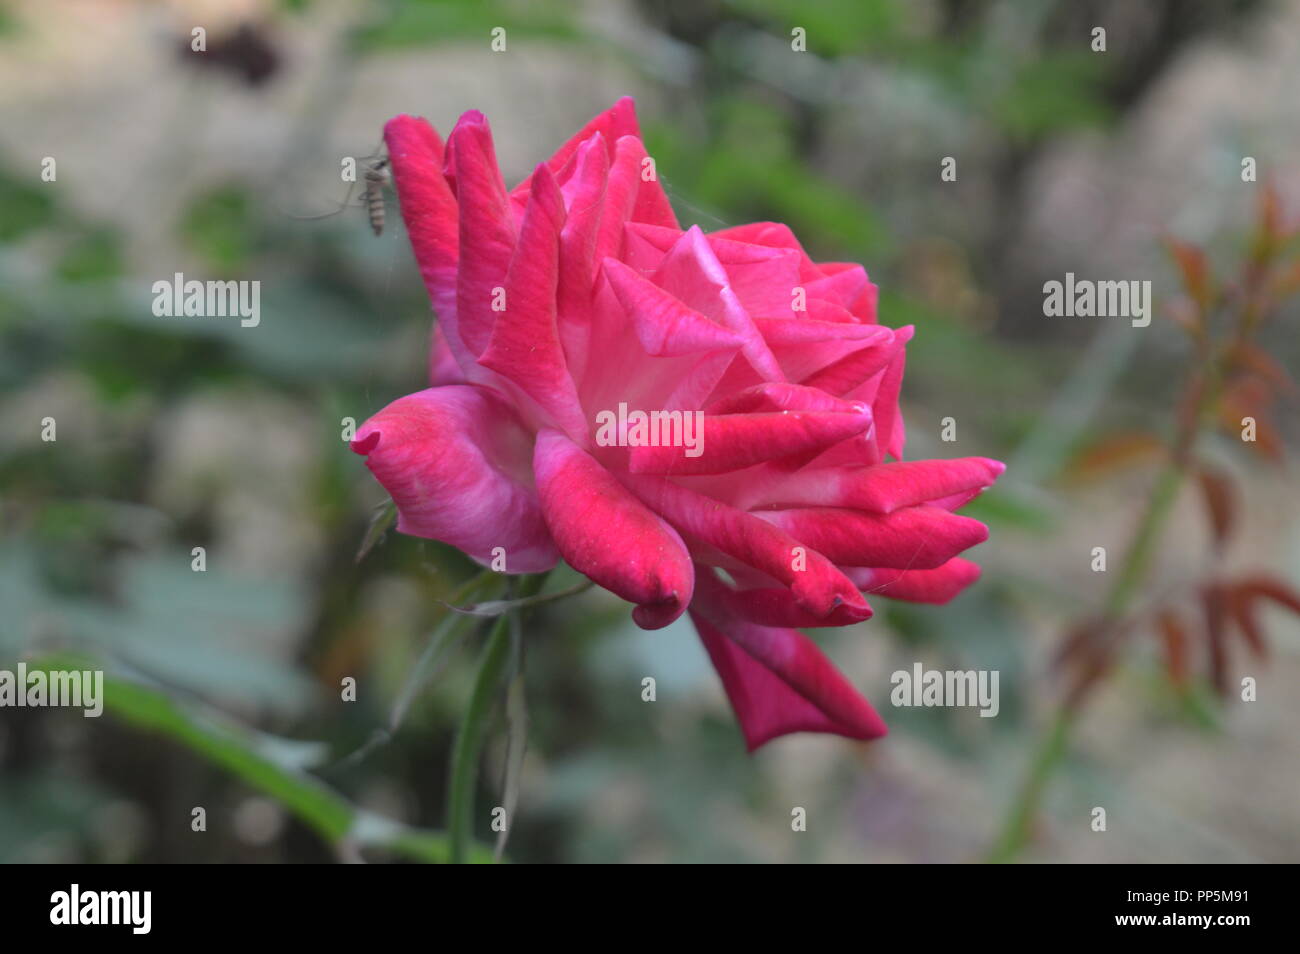 White and Red mixed color rose with background blur Stock Photo